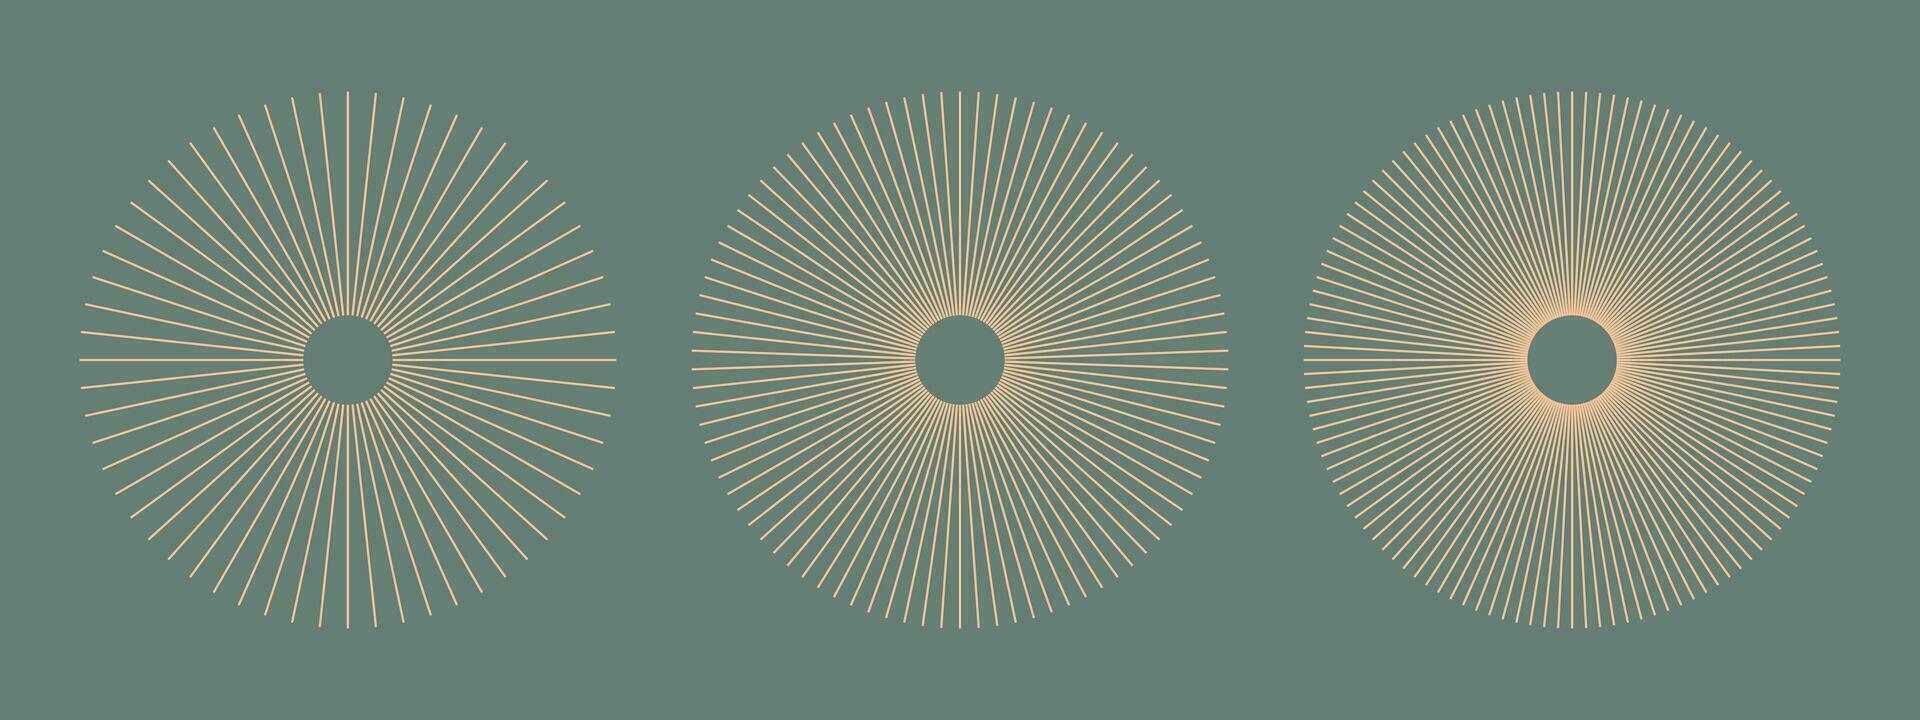 Radial circle lines. Circular lines elements. Symbol of Sun star rays. Peach Fuzz snowflake. Flat design element. Abstract illusion geometric shape. Spokes with radiating stripes. Vector graphic. Eps.